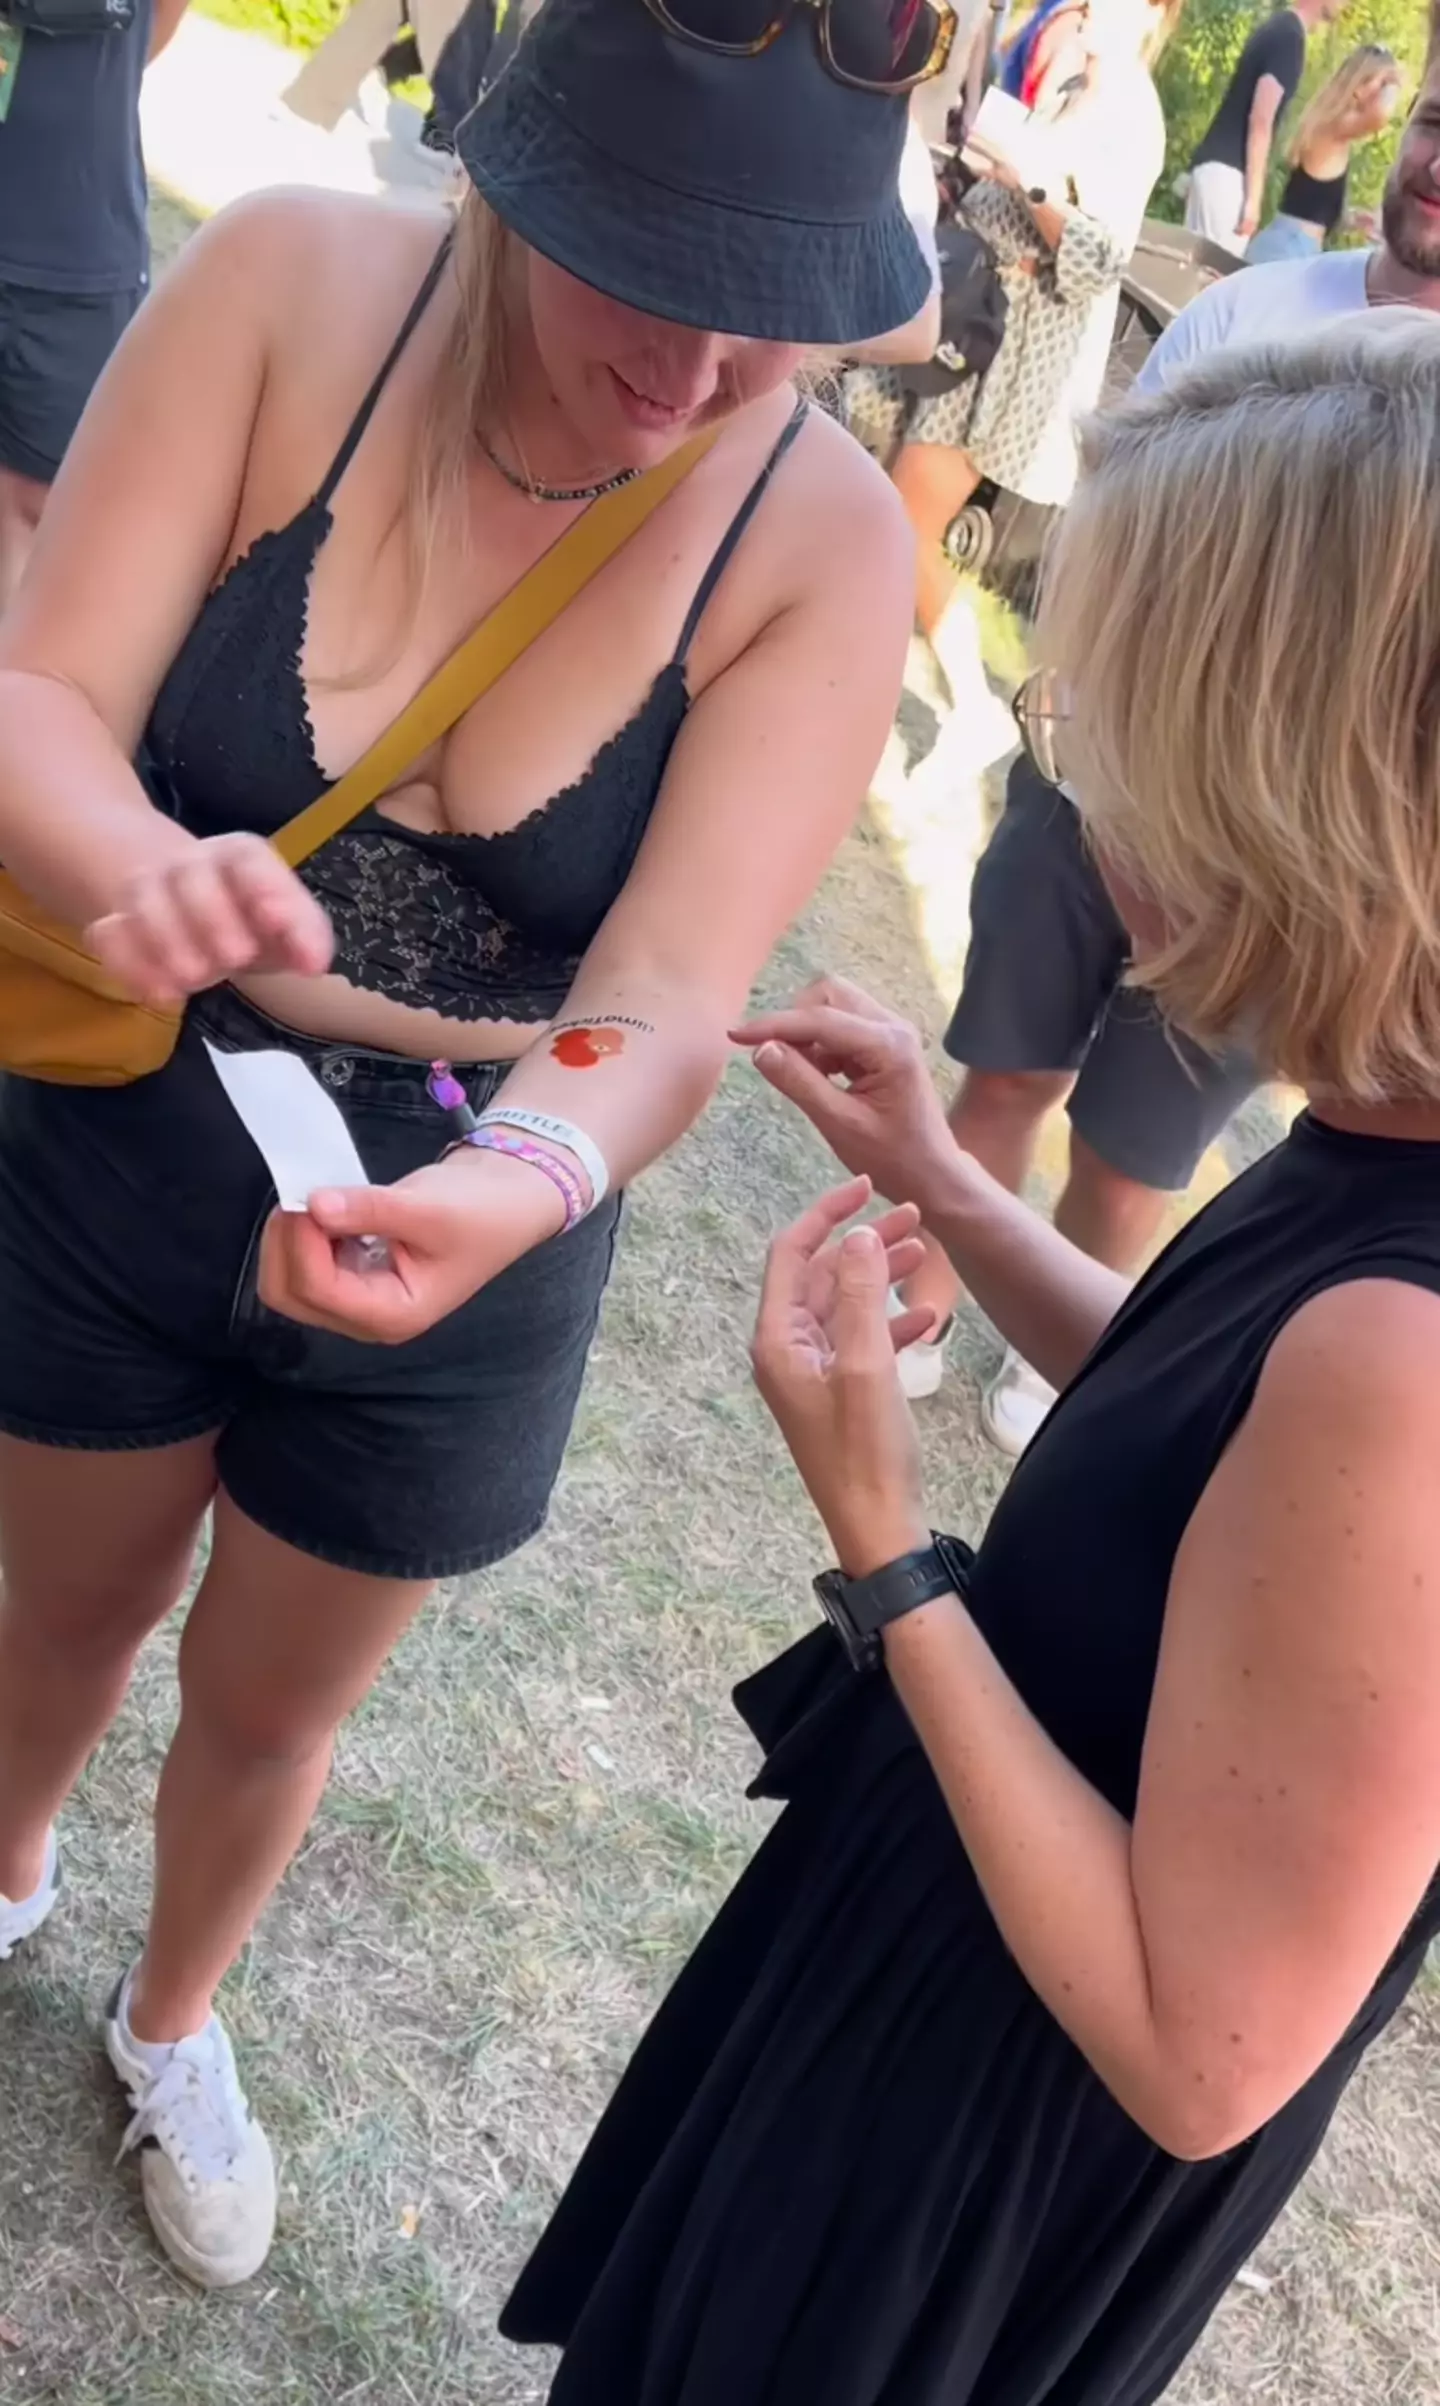 Festivalgoers actually ended up getting the tattoos.